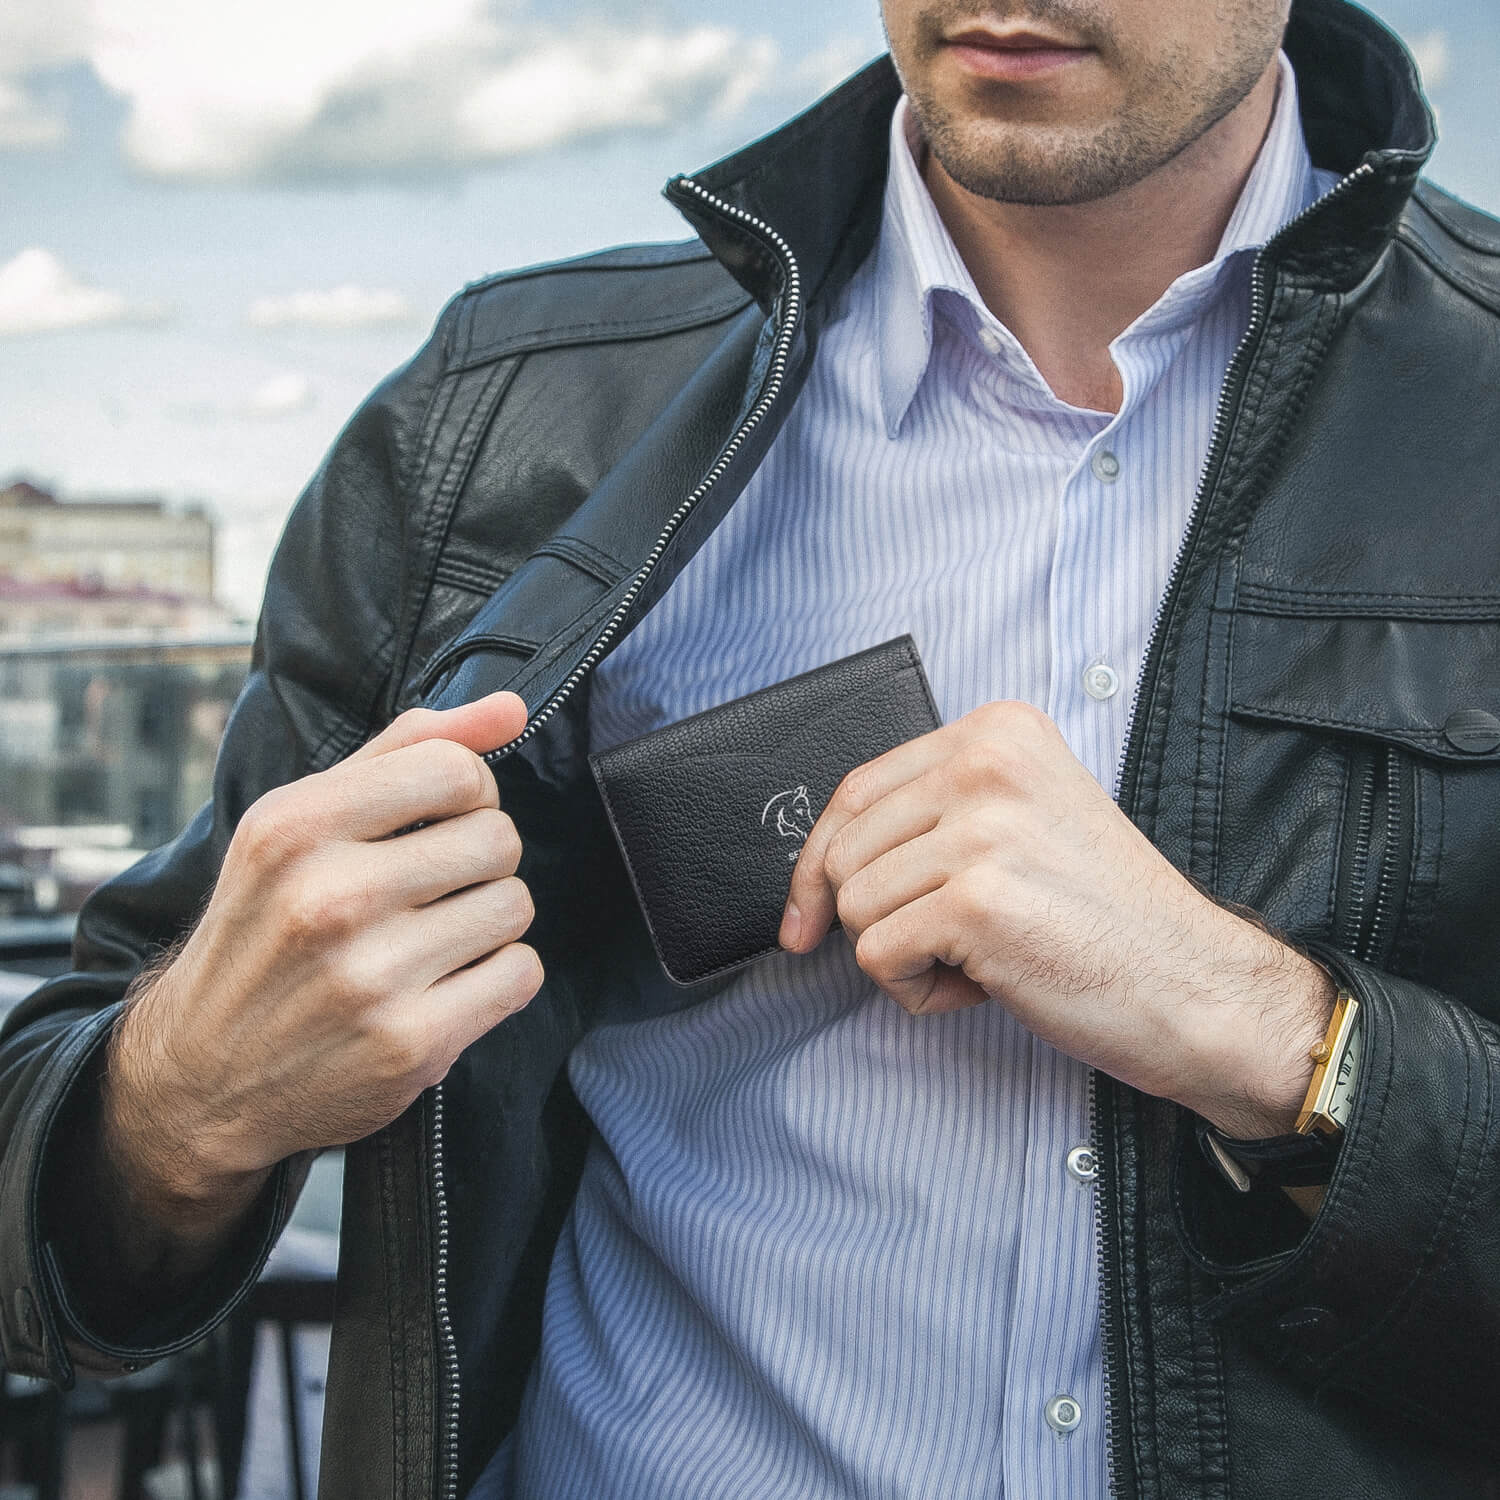 Serel's Gracious Bifold Wallet Getting into the inside pocket of your coat